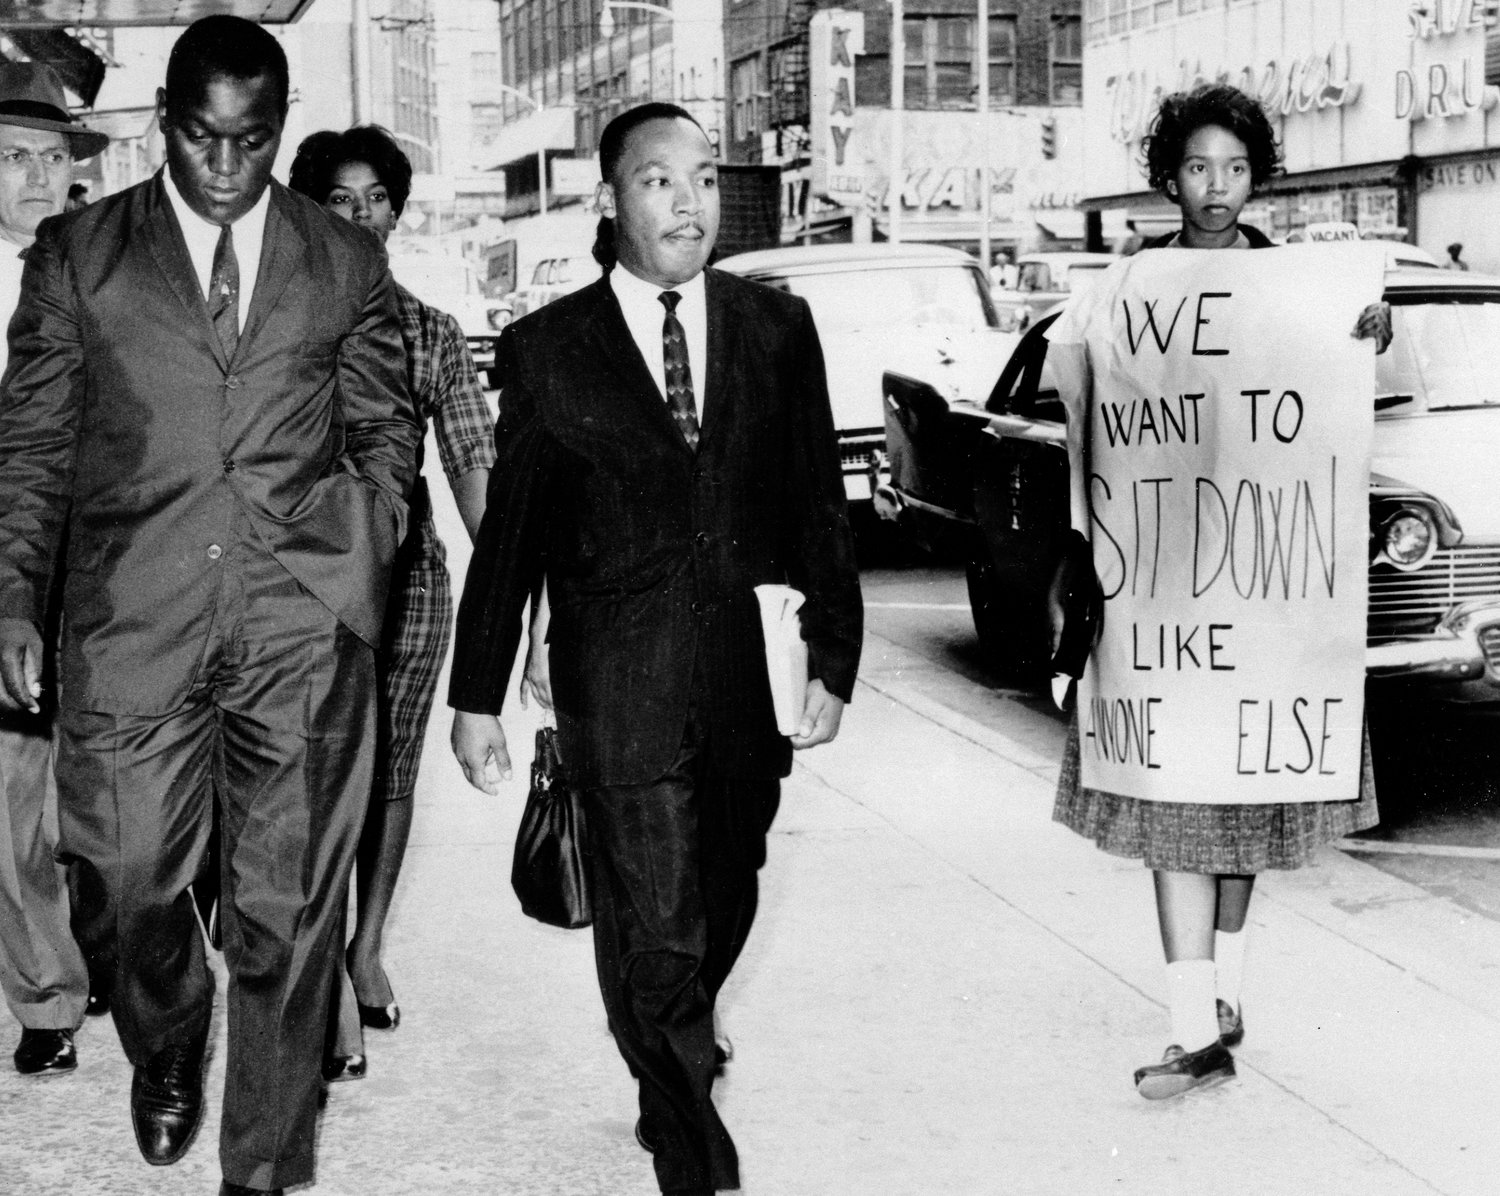 FILE - In this Oct. 19, 1960 file photo, Dr. Martin Luther King Jr. under arrest by Atlanta Police Captain R.E. Little, left rear, passes through a picket line outside Rich's Department Store, in atlanta. On King's right are Atlanta Student Movement leader Lonnie King and Spelman College student Marilyn Pryce. Holding the sign is Spelman student activist Ida Rose McCree. Following the publication of "An Appeal for Human Rights" on March 9, 1960, students at Atlanta's historically black colleges waged a nonviolent campaign of boycotts and sit-ins protesting segregation at restaurants, theaters, parks and government buildings. (AP Photo, File)